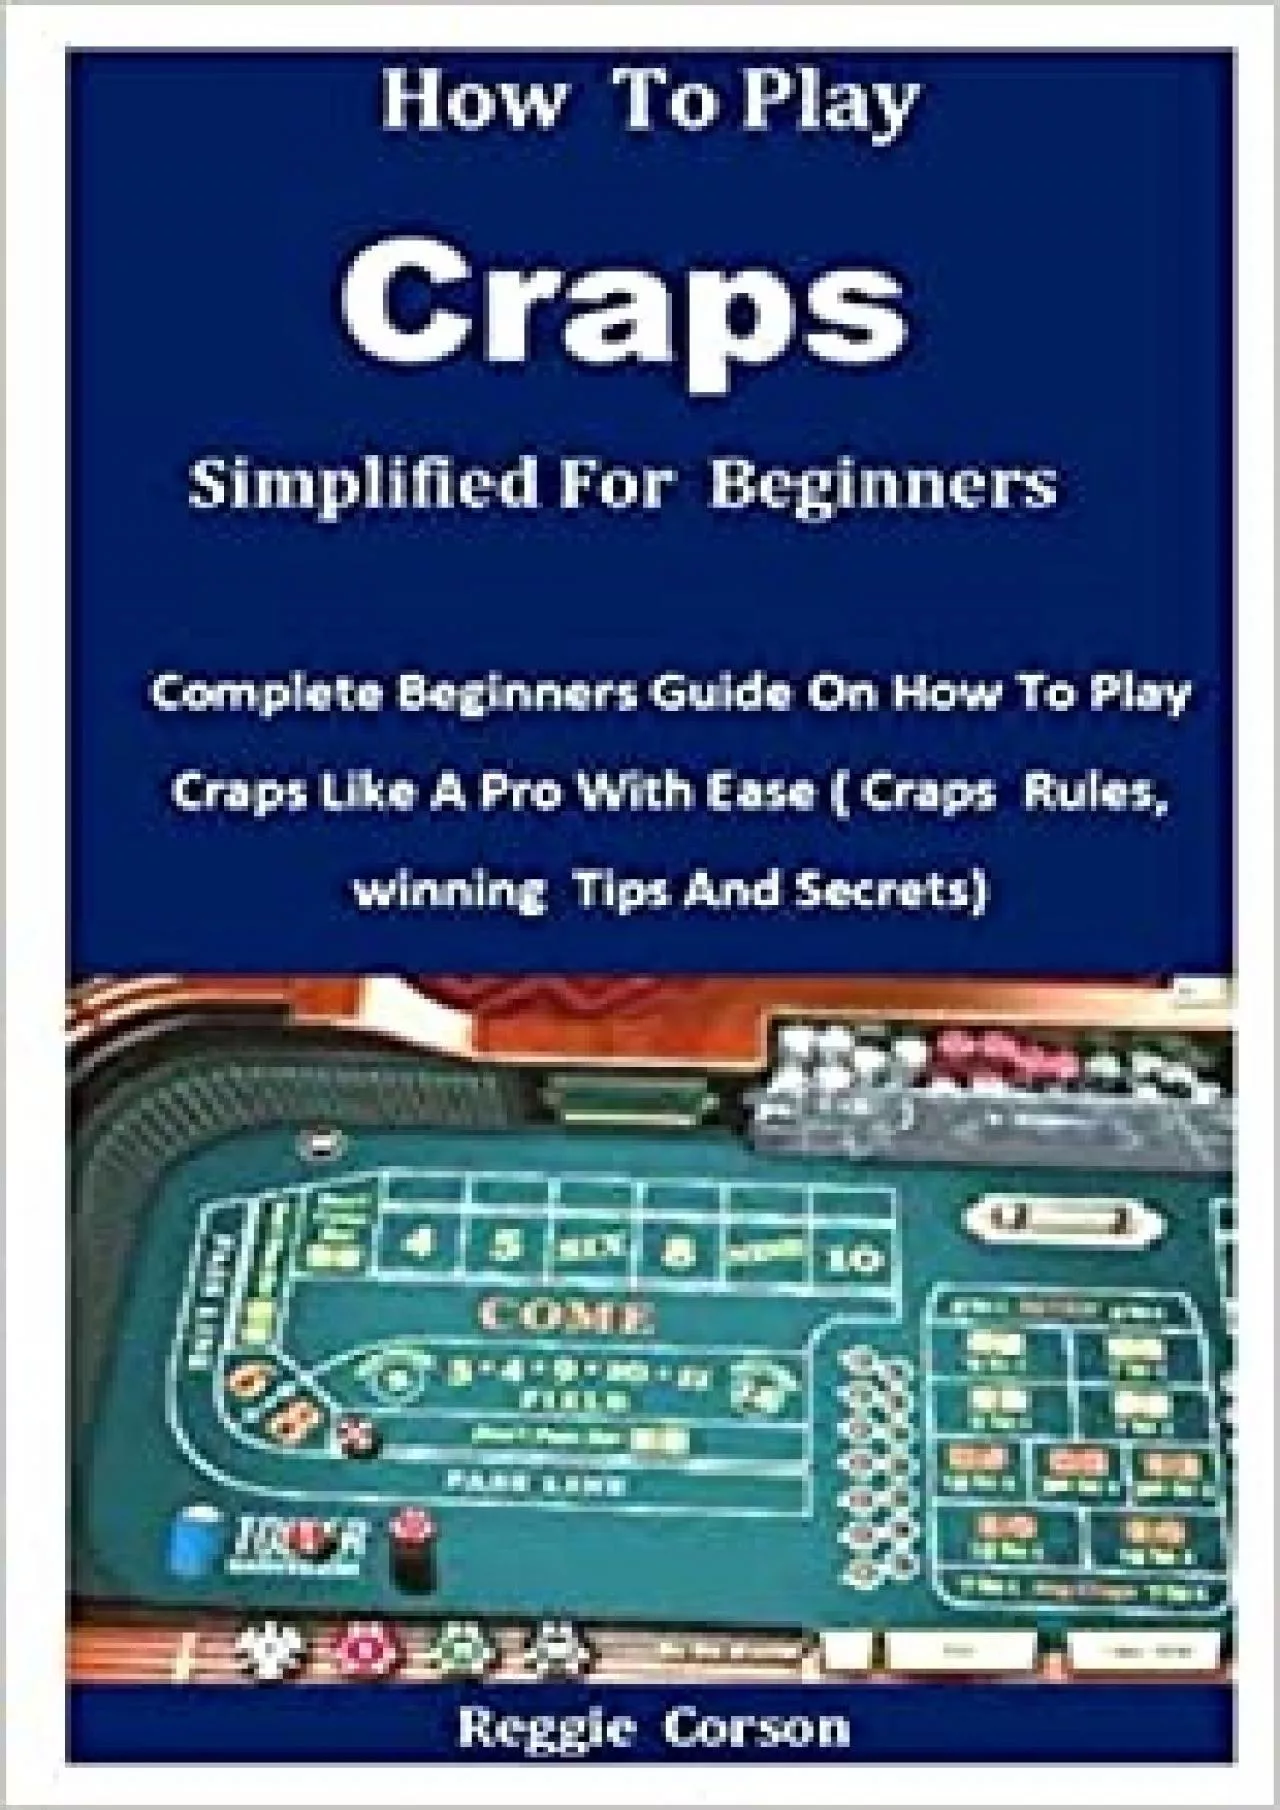 (BOOK)-How To Play Craps Simplified For Beginners Complete Beginners Guide On How To Play